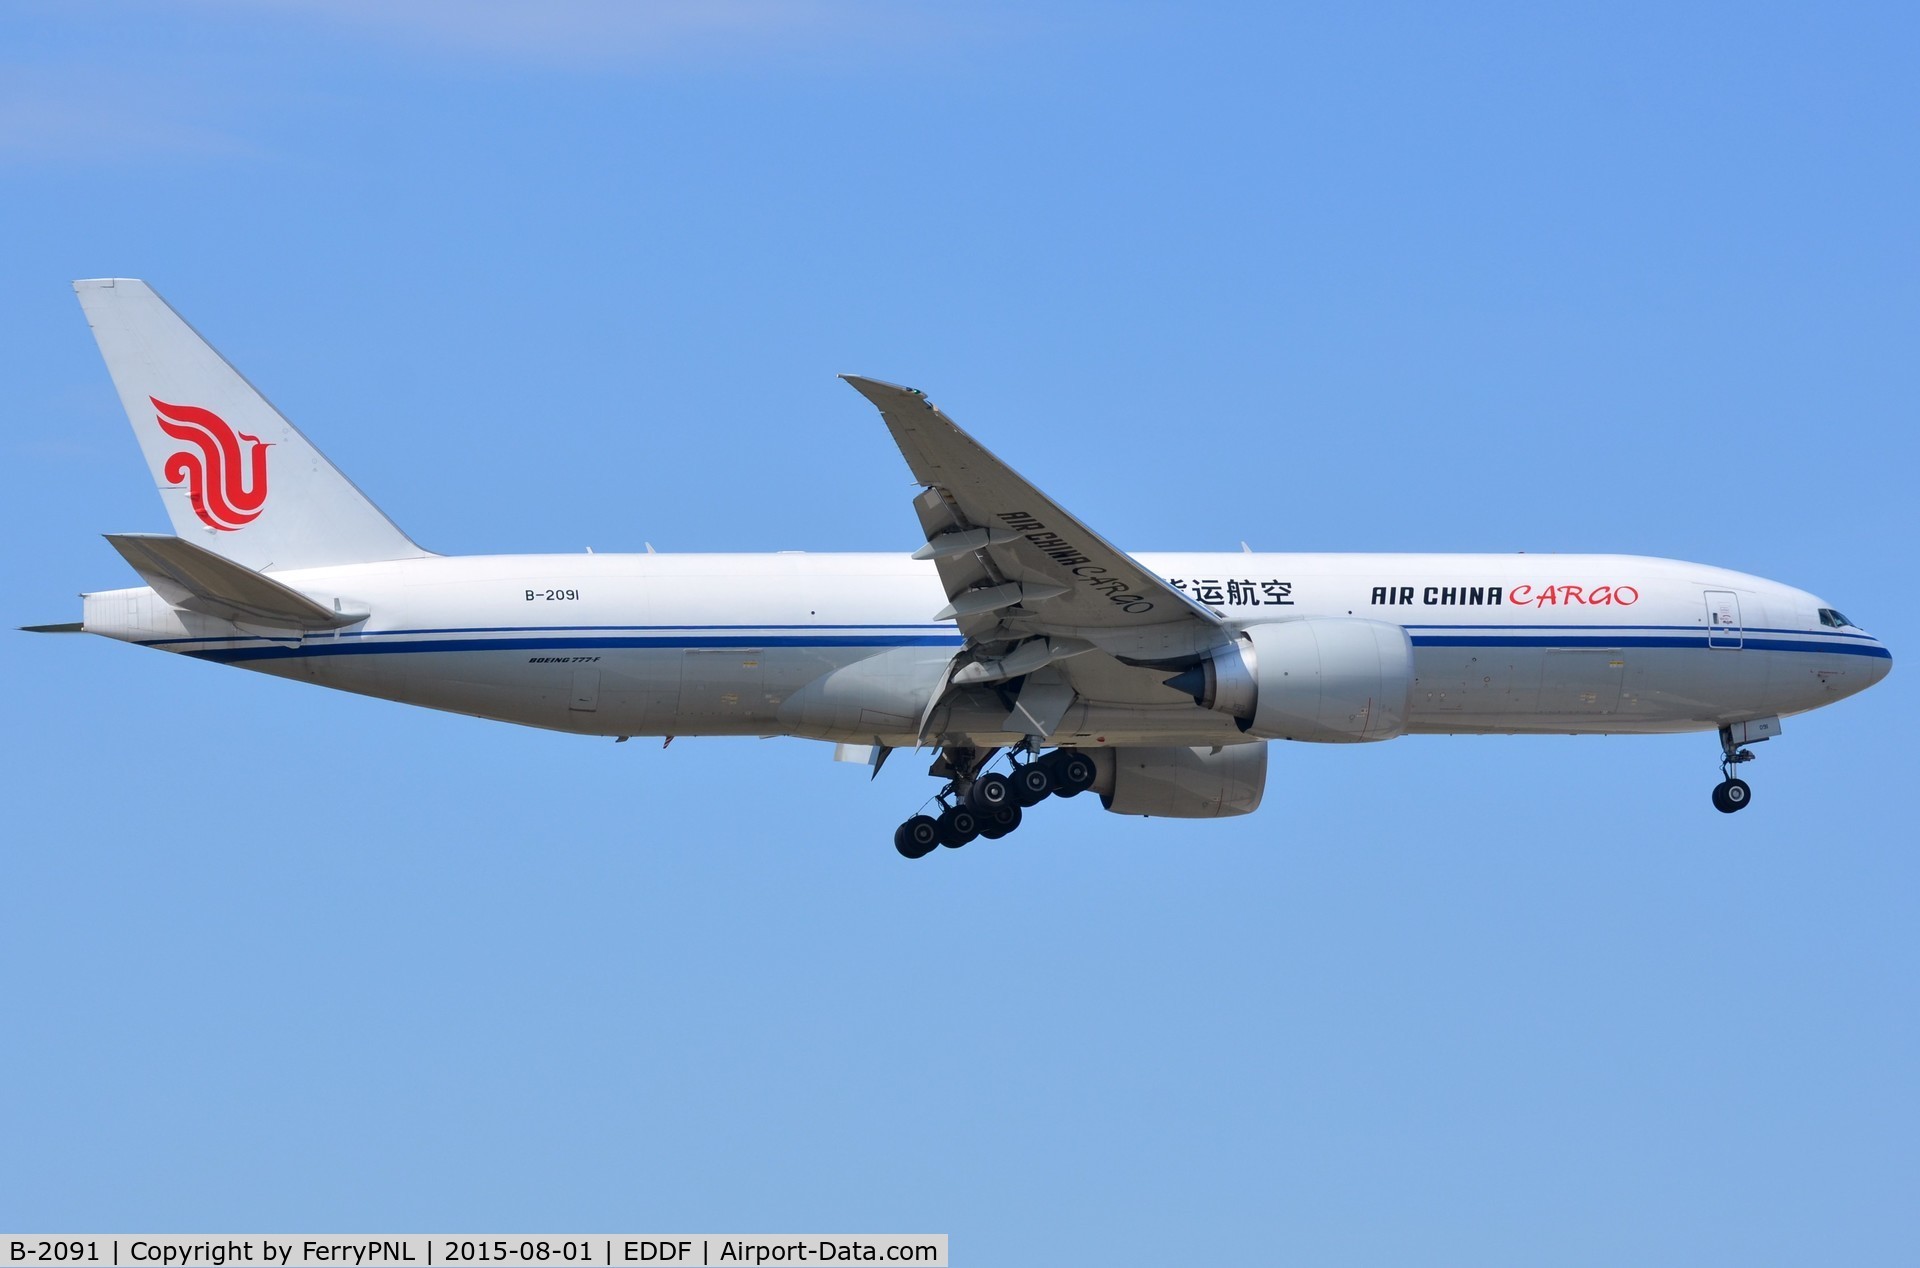 B-2091, 2014 Boeing 777-FFT C/N 44682, Arrival of Air China B772F